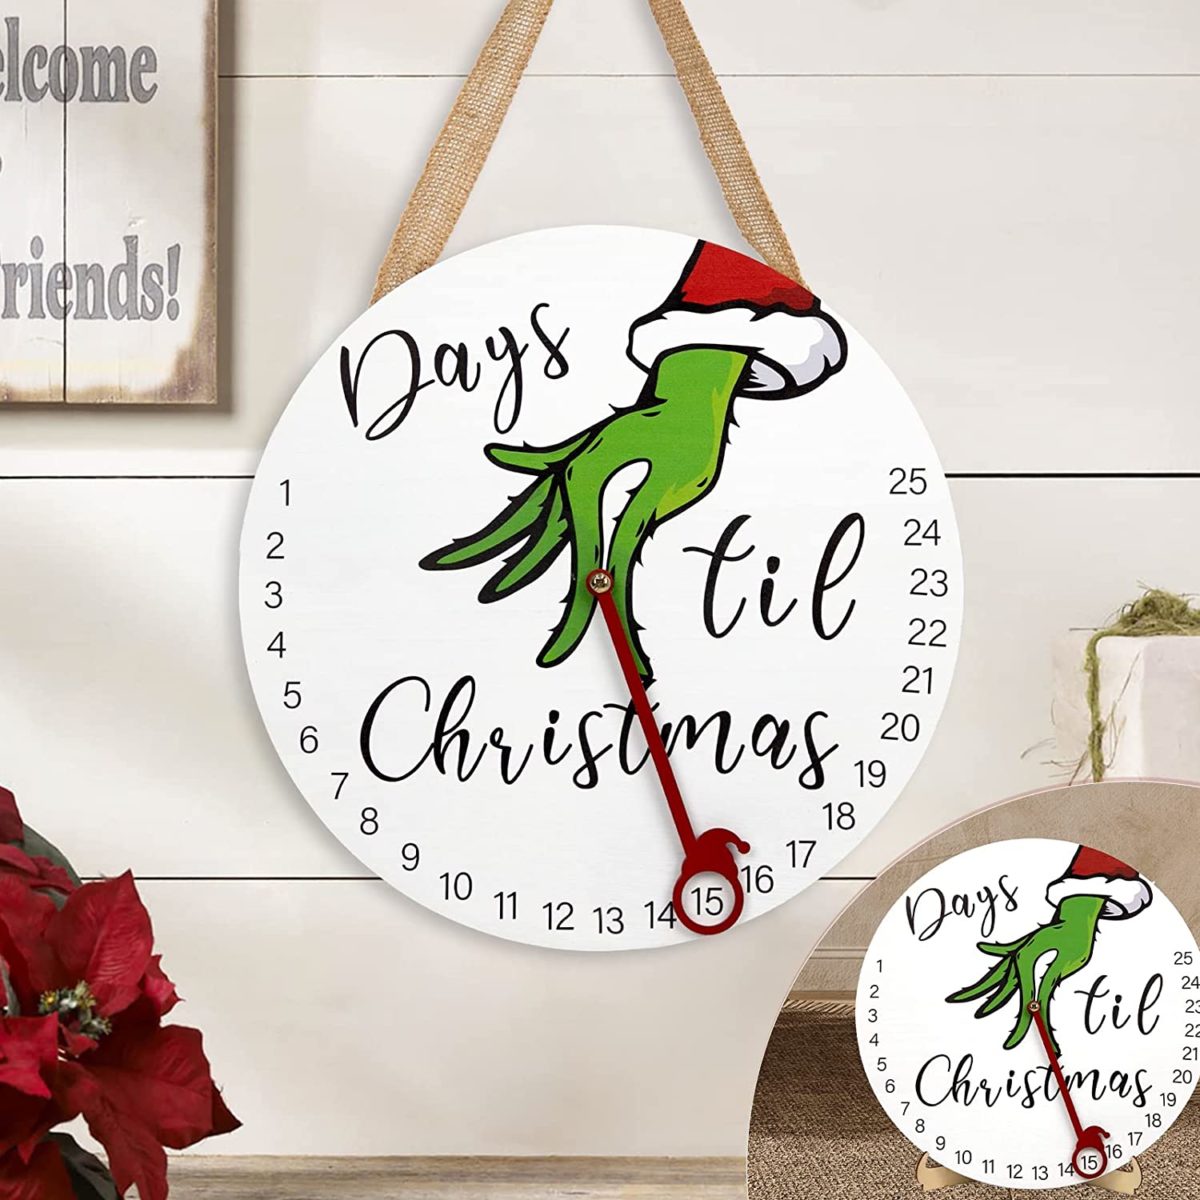 Affordable Christmas Decorations